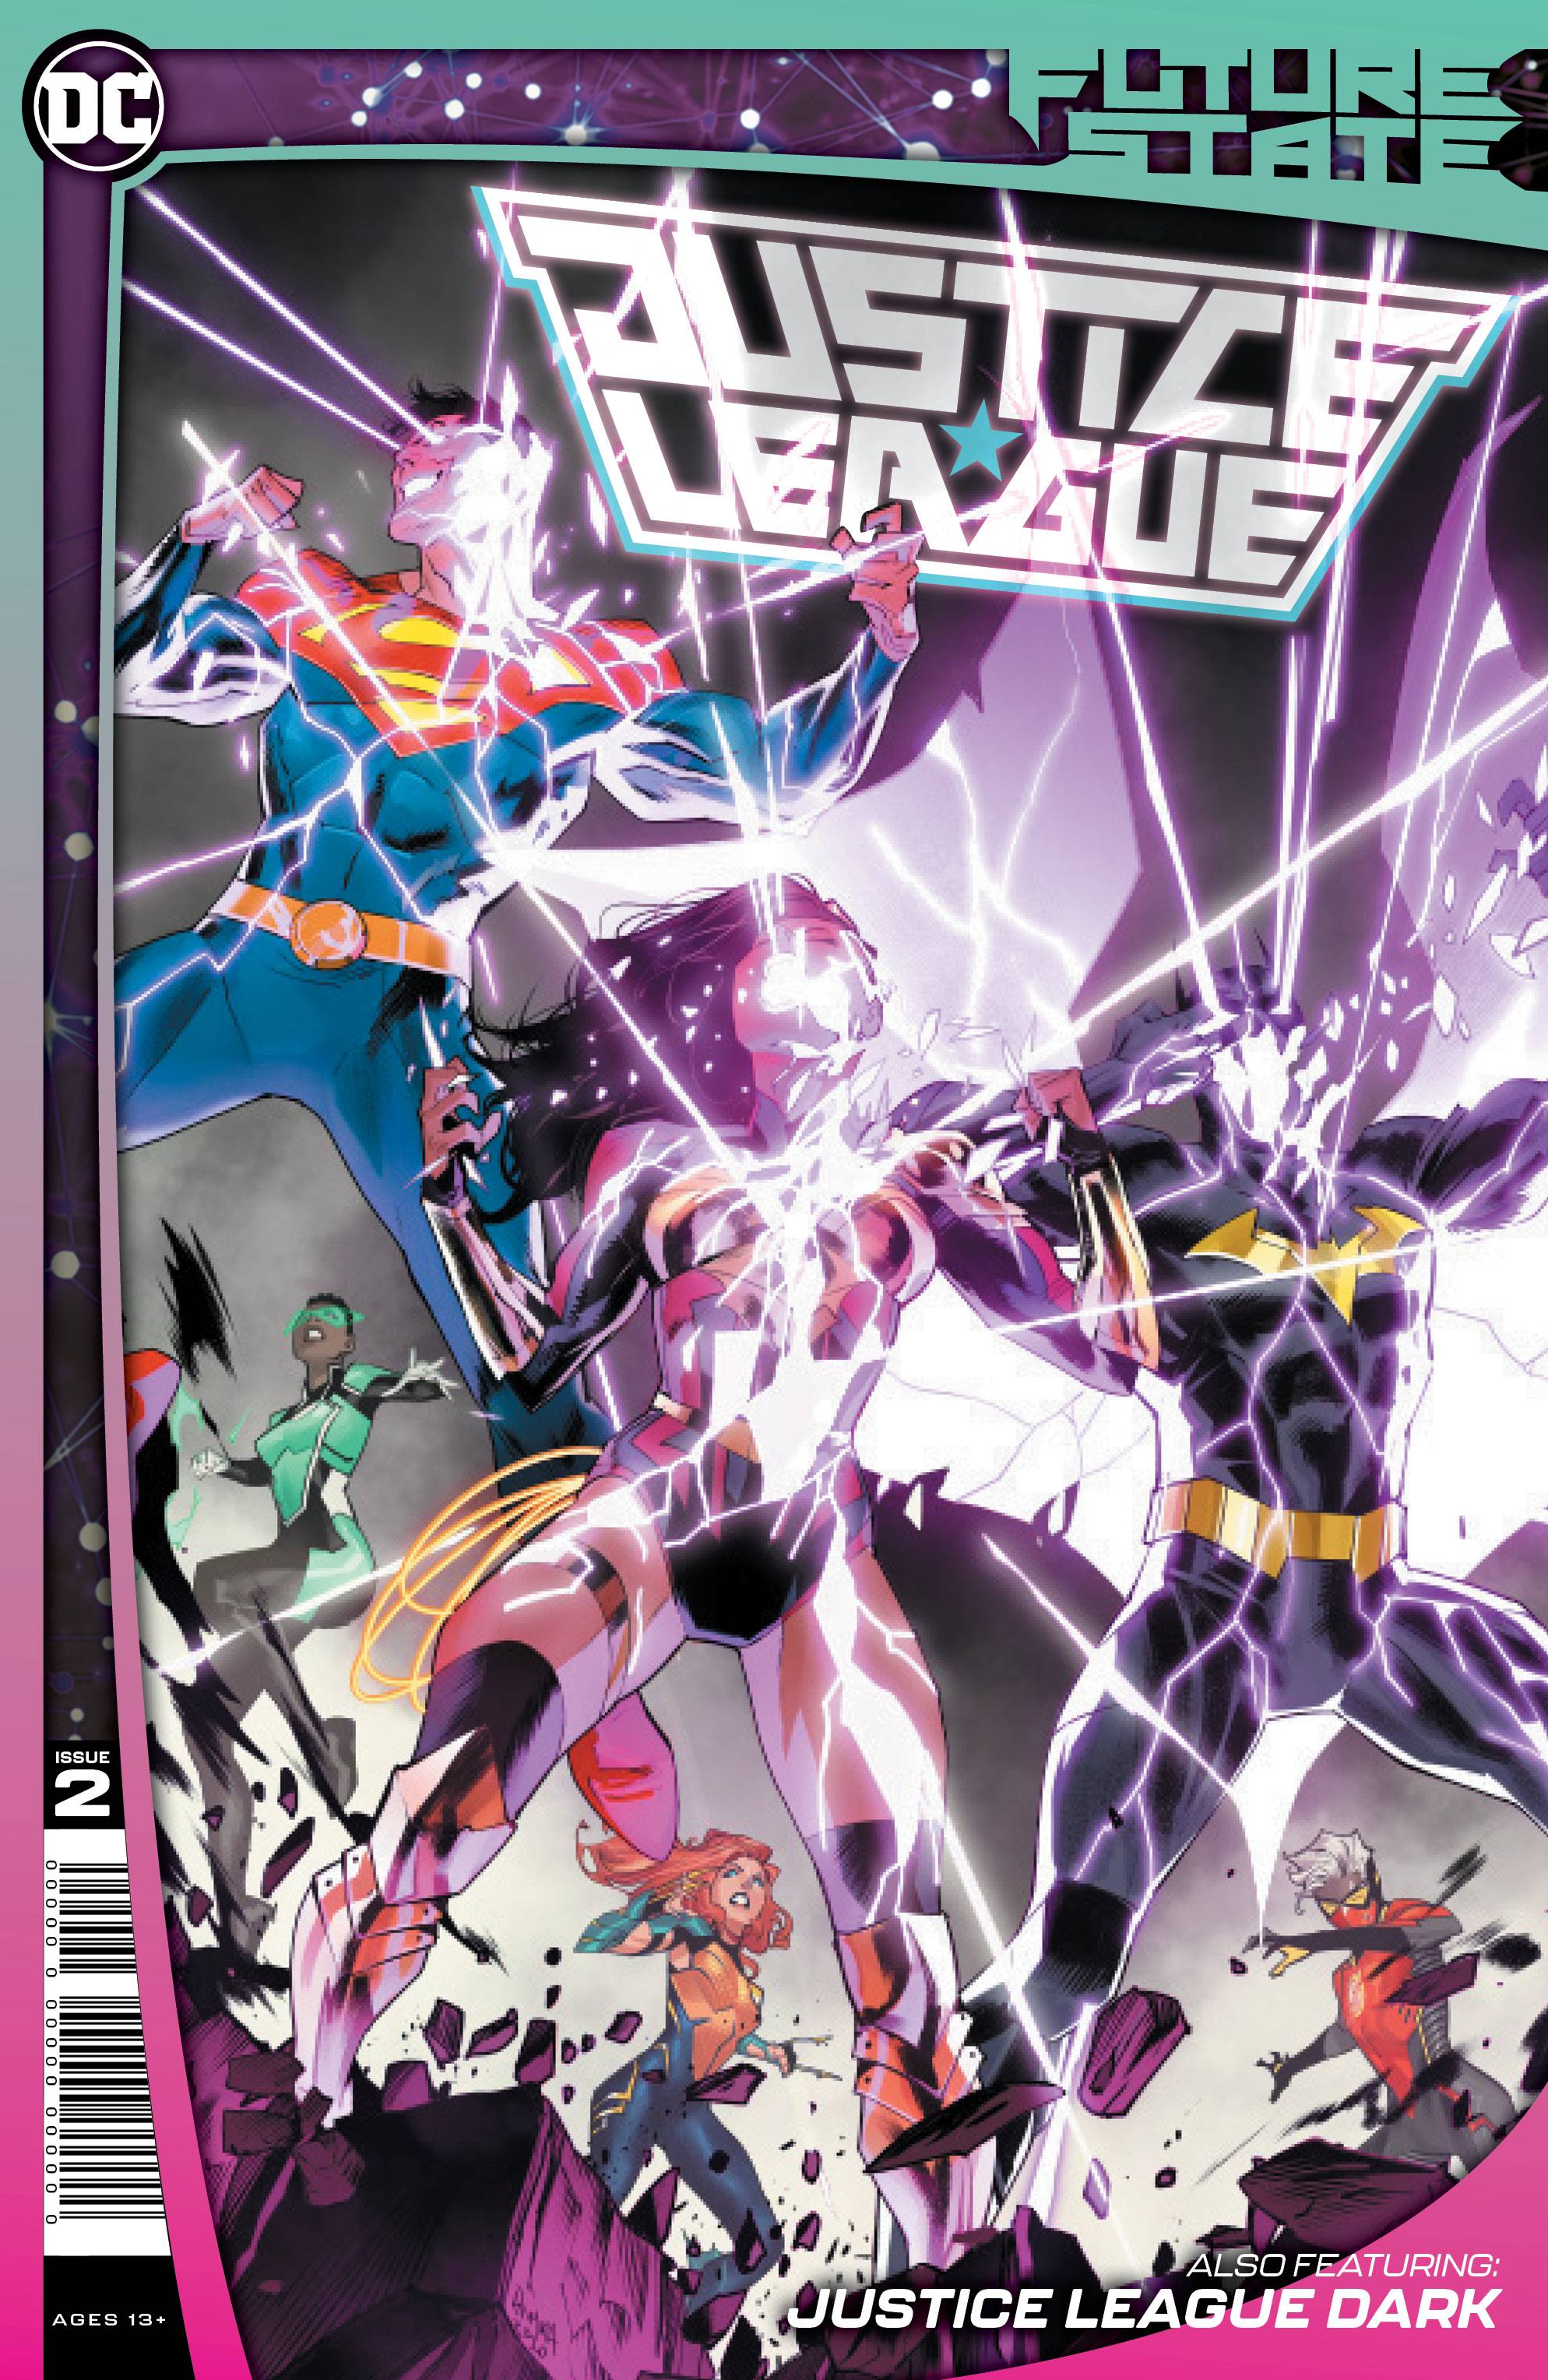 FUTURE STATE JUSTICE LEAGUE #2 | Game Master's Emporium (The New GME)